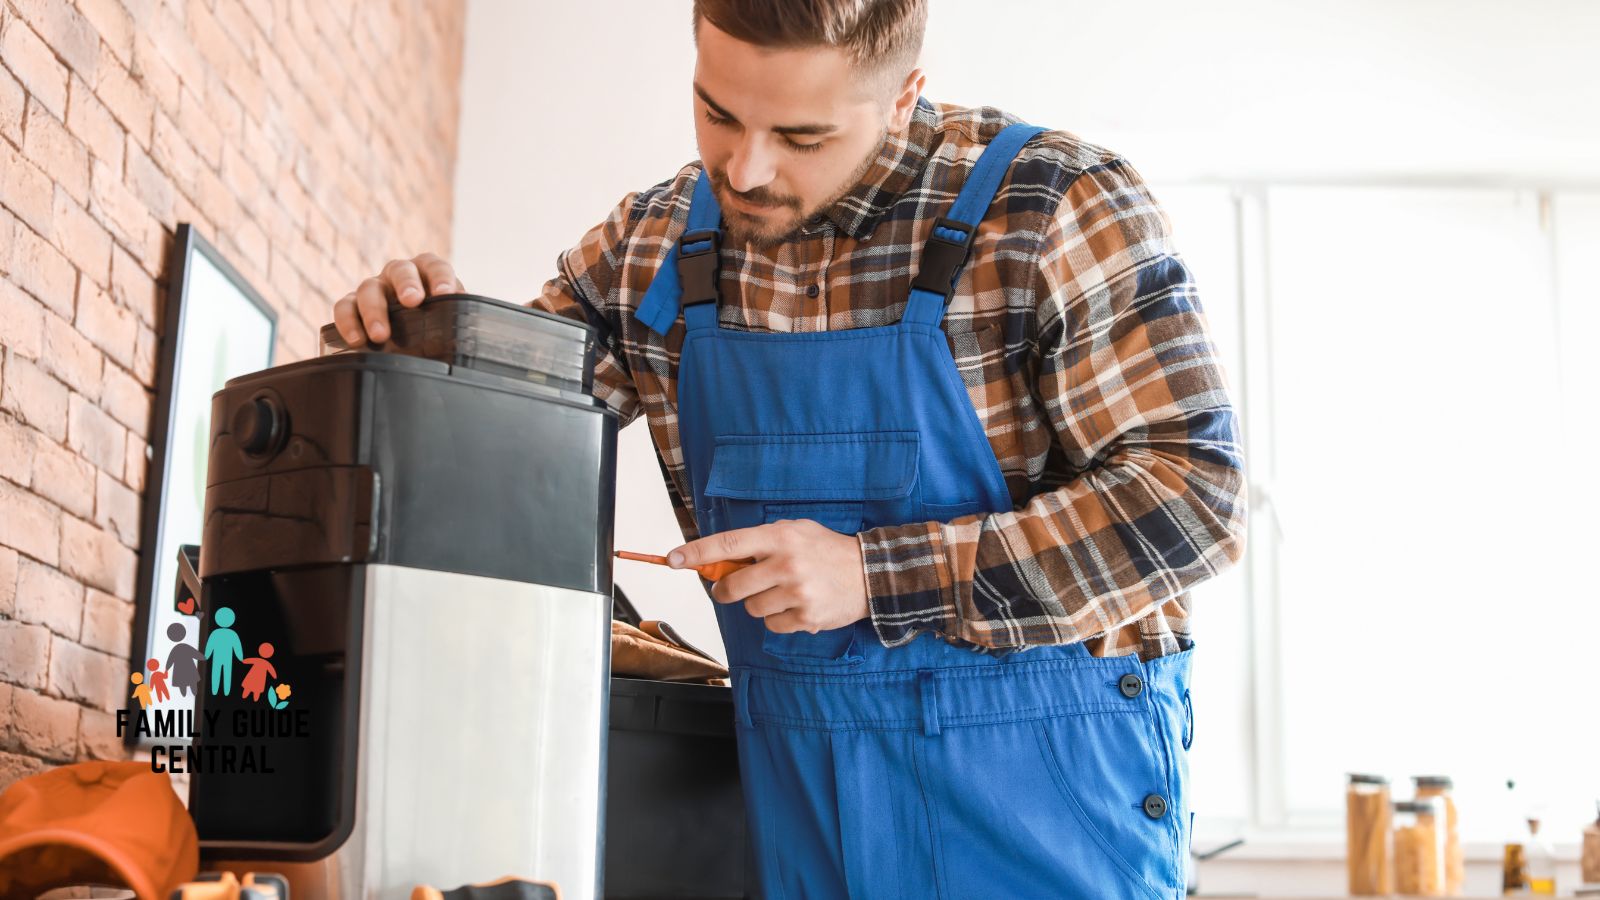 Coffee maker not working - familyguidecentral.com